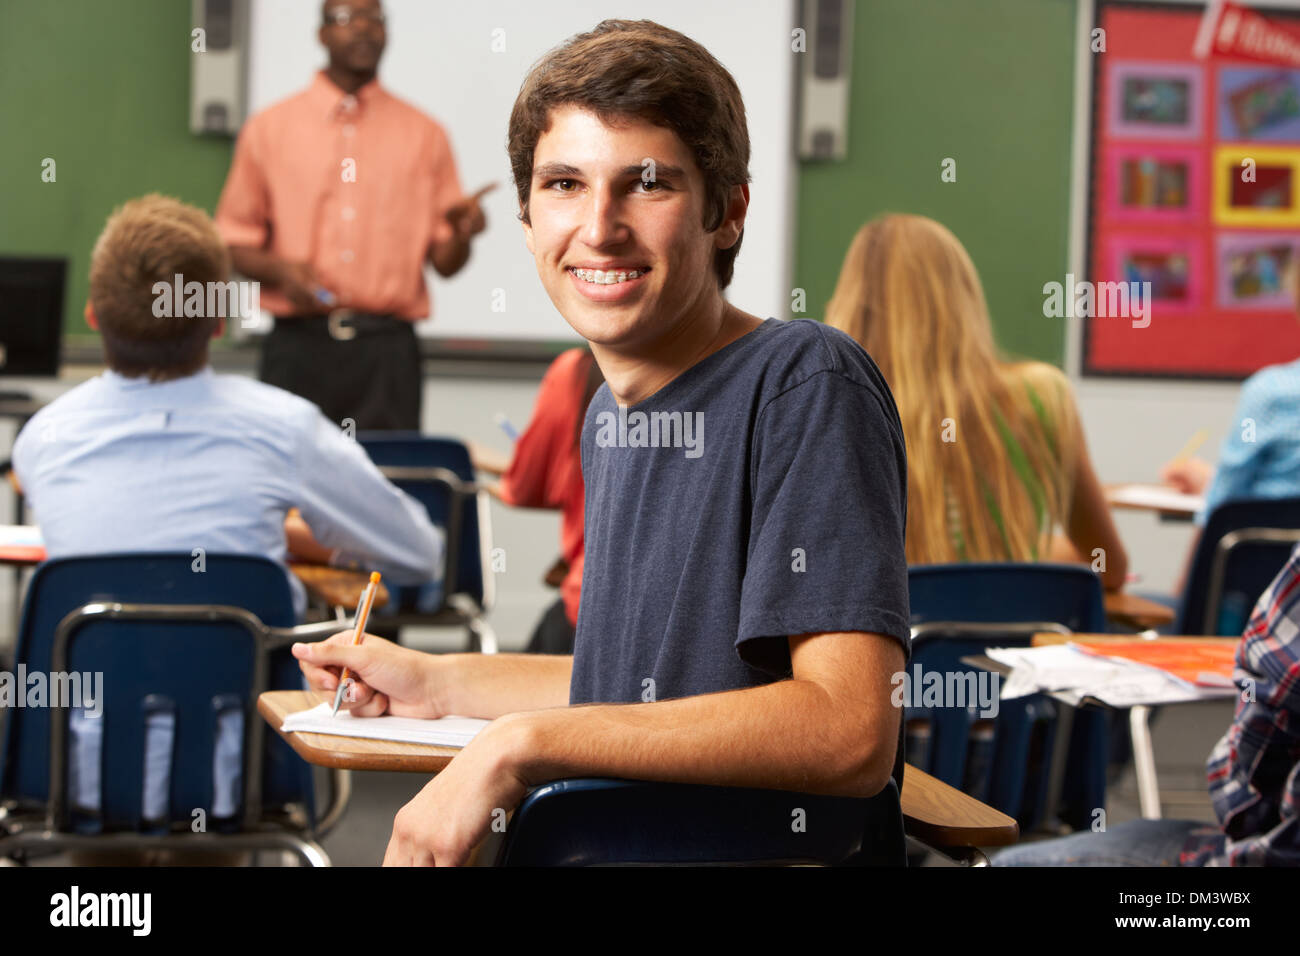 Male Teenage Pupil In Classroom Stock Photo